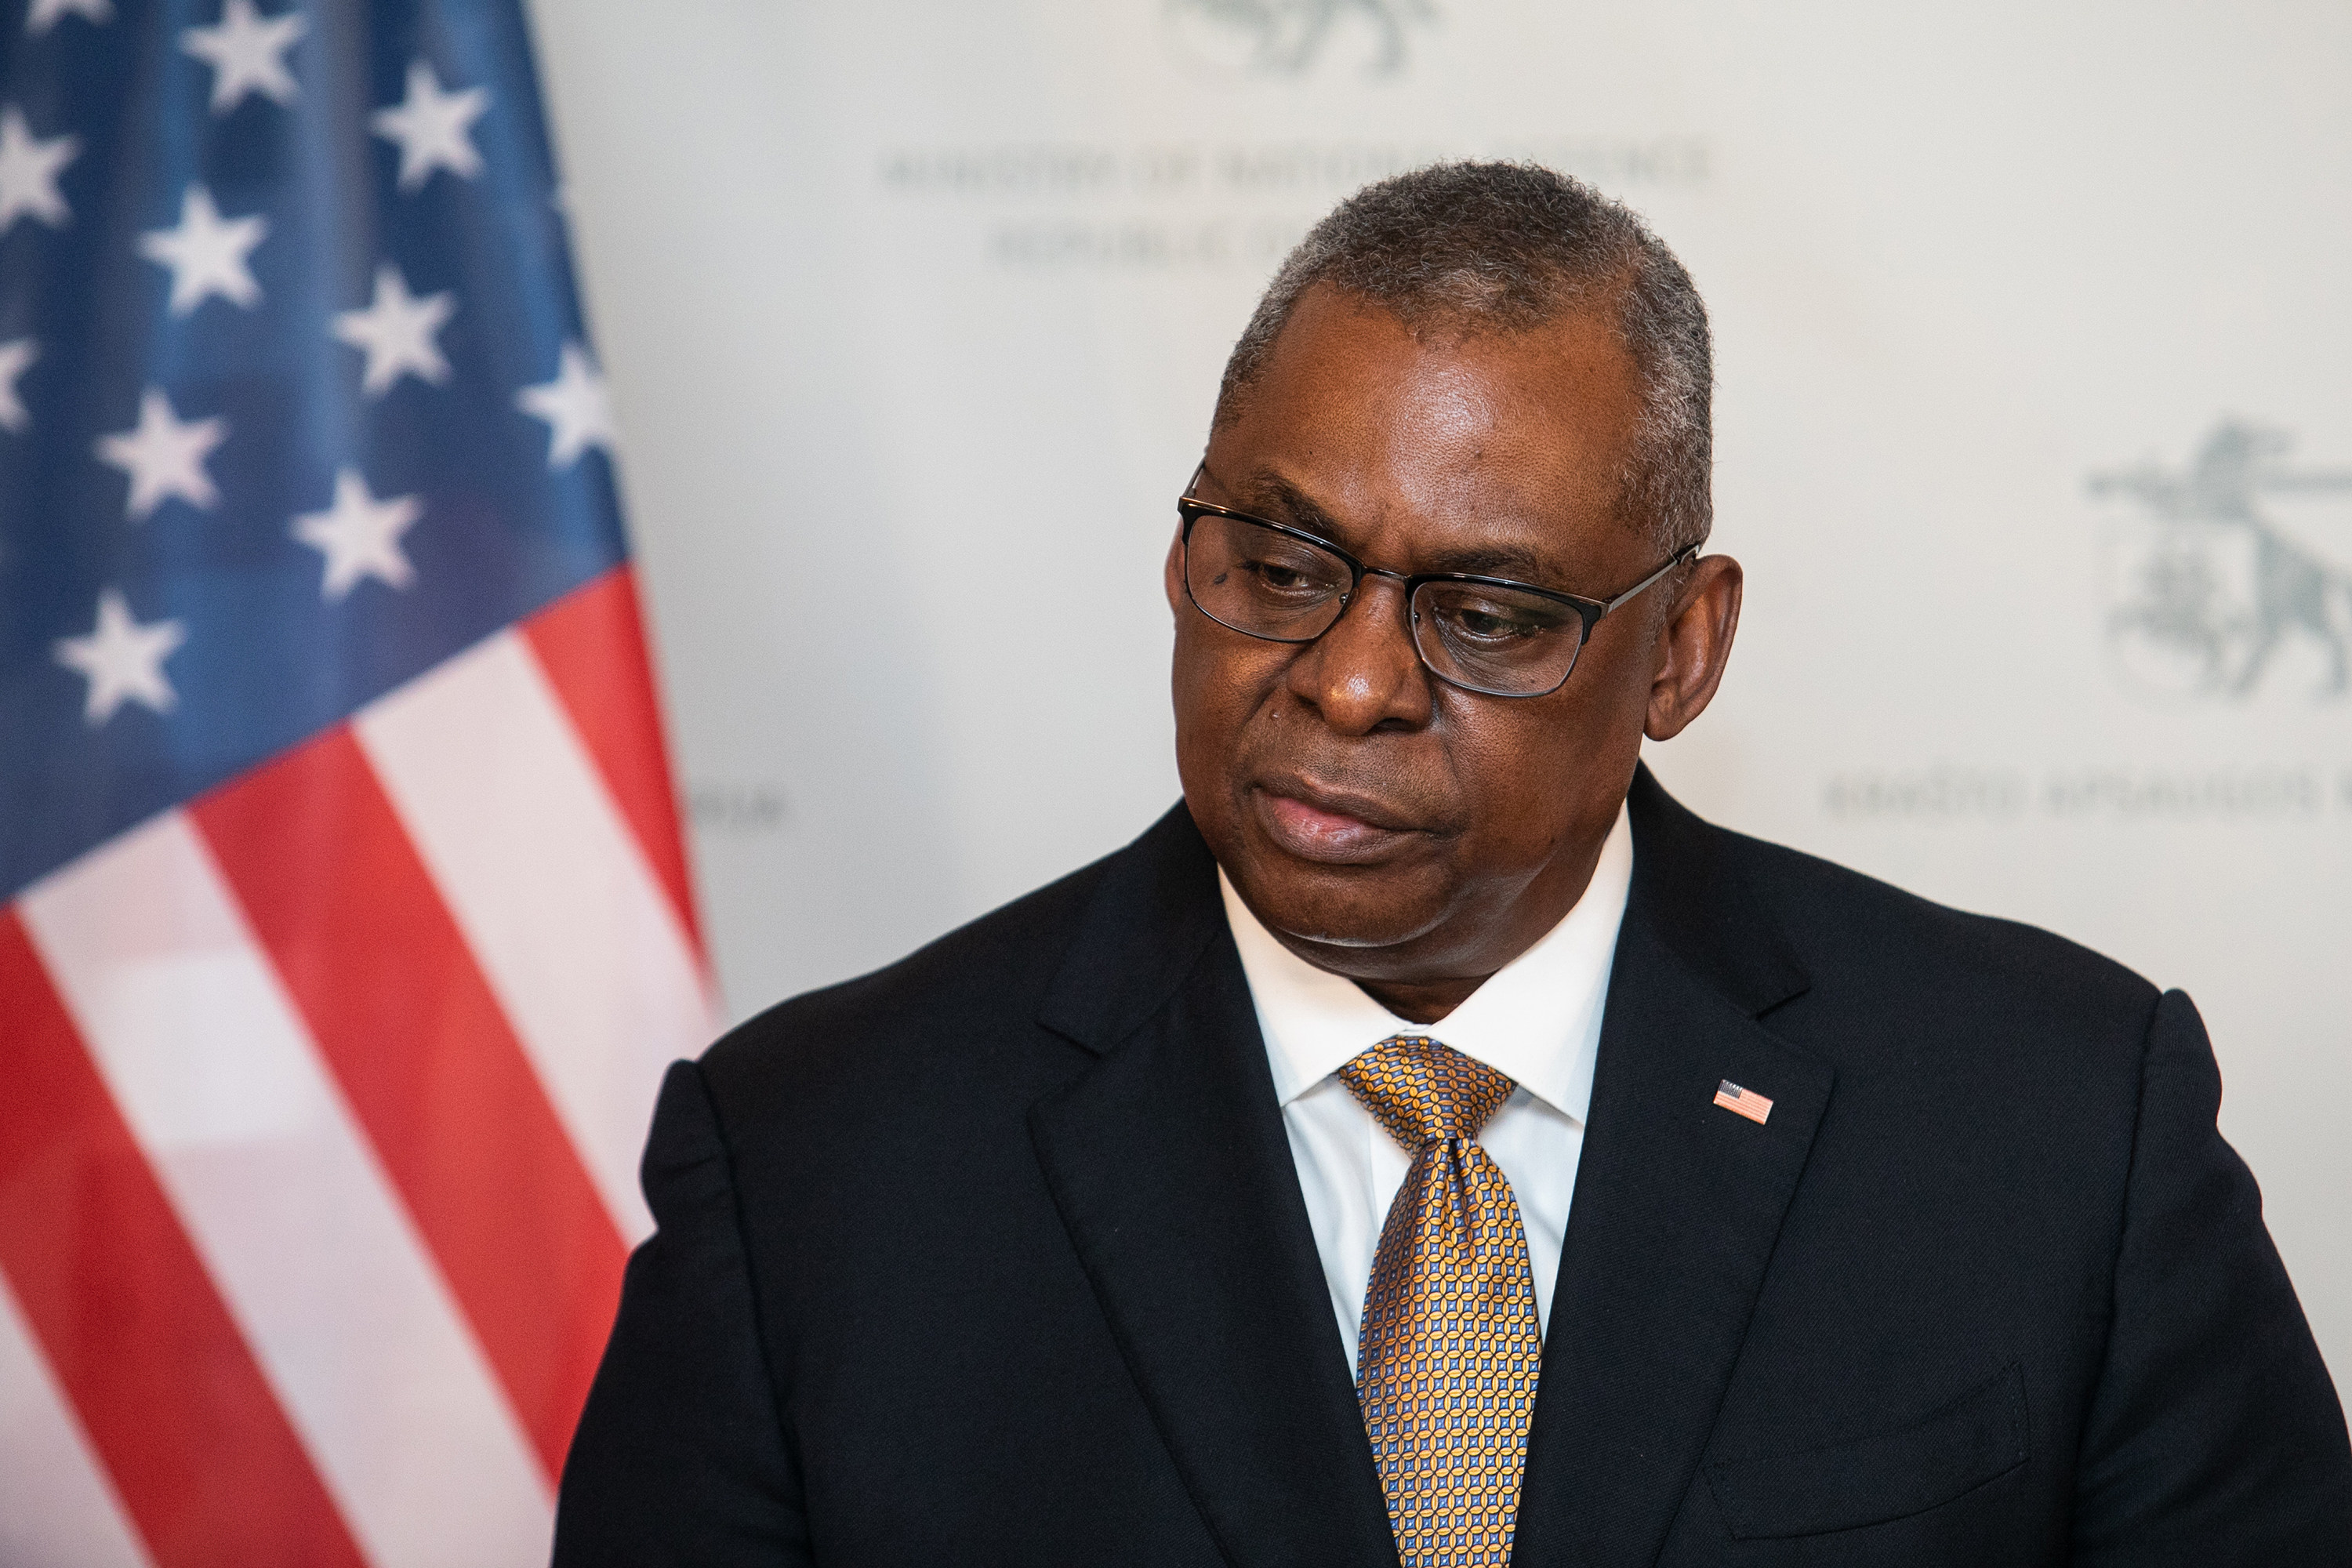 US Defence Secretary Lloyd Austin was asked on CNN whether the US military was preparing to send troops to Taiwan in line with Pesident  Biden’s comments, but he declined to answer directly. Photo: Getty Images/TNS